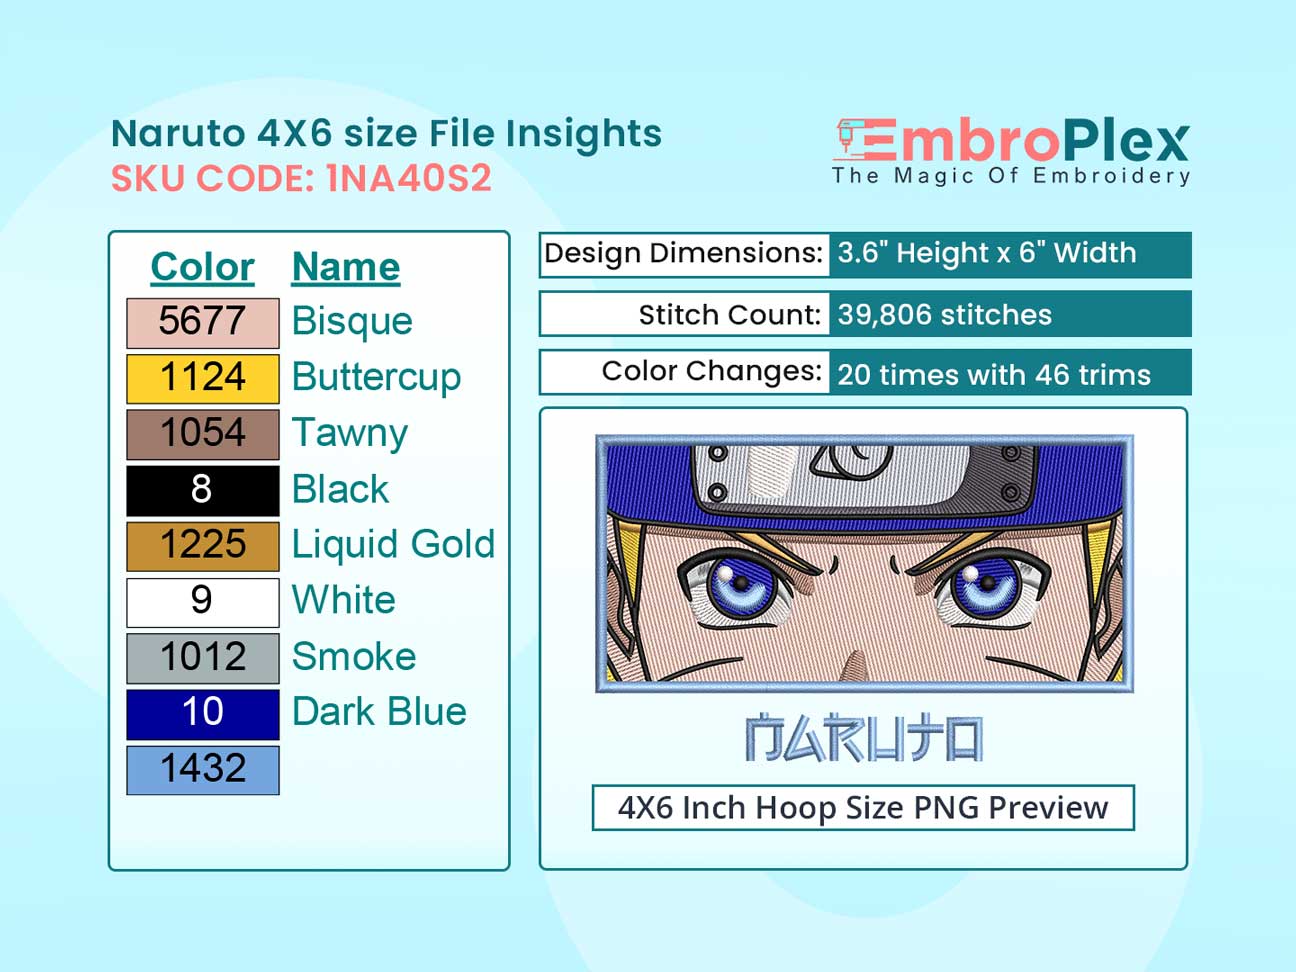 Anime-Inspired Naruto Embroidery Design File - 4x6 Inch hoop Size Variation overview image